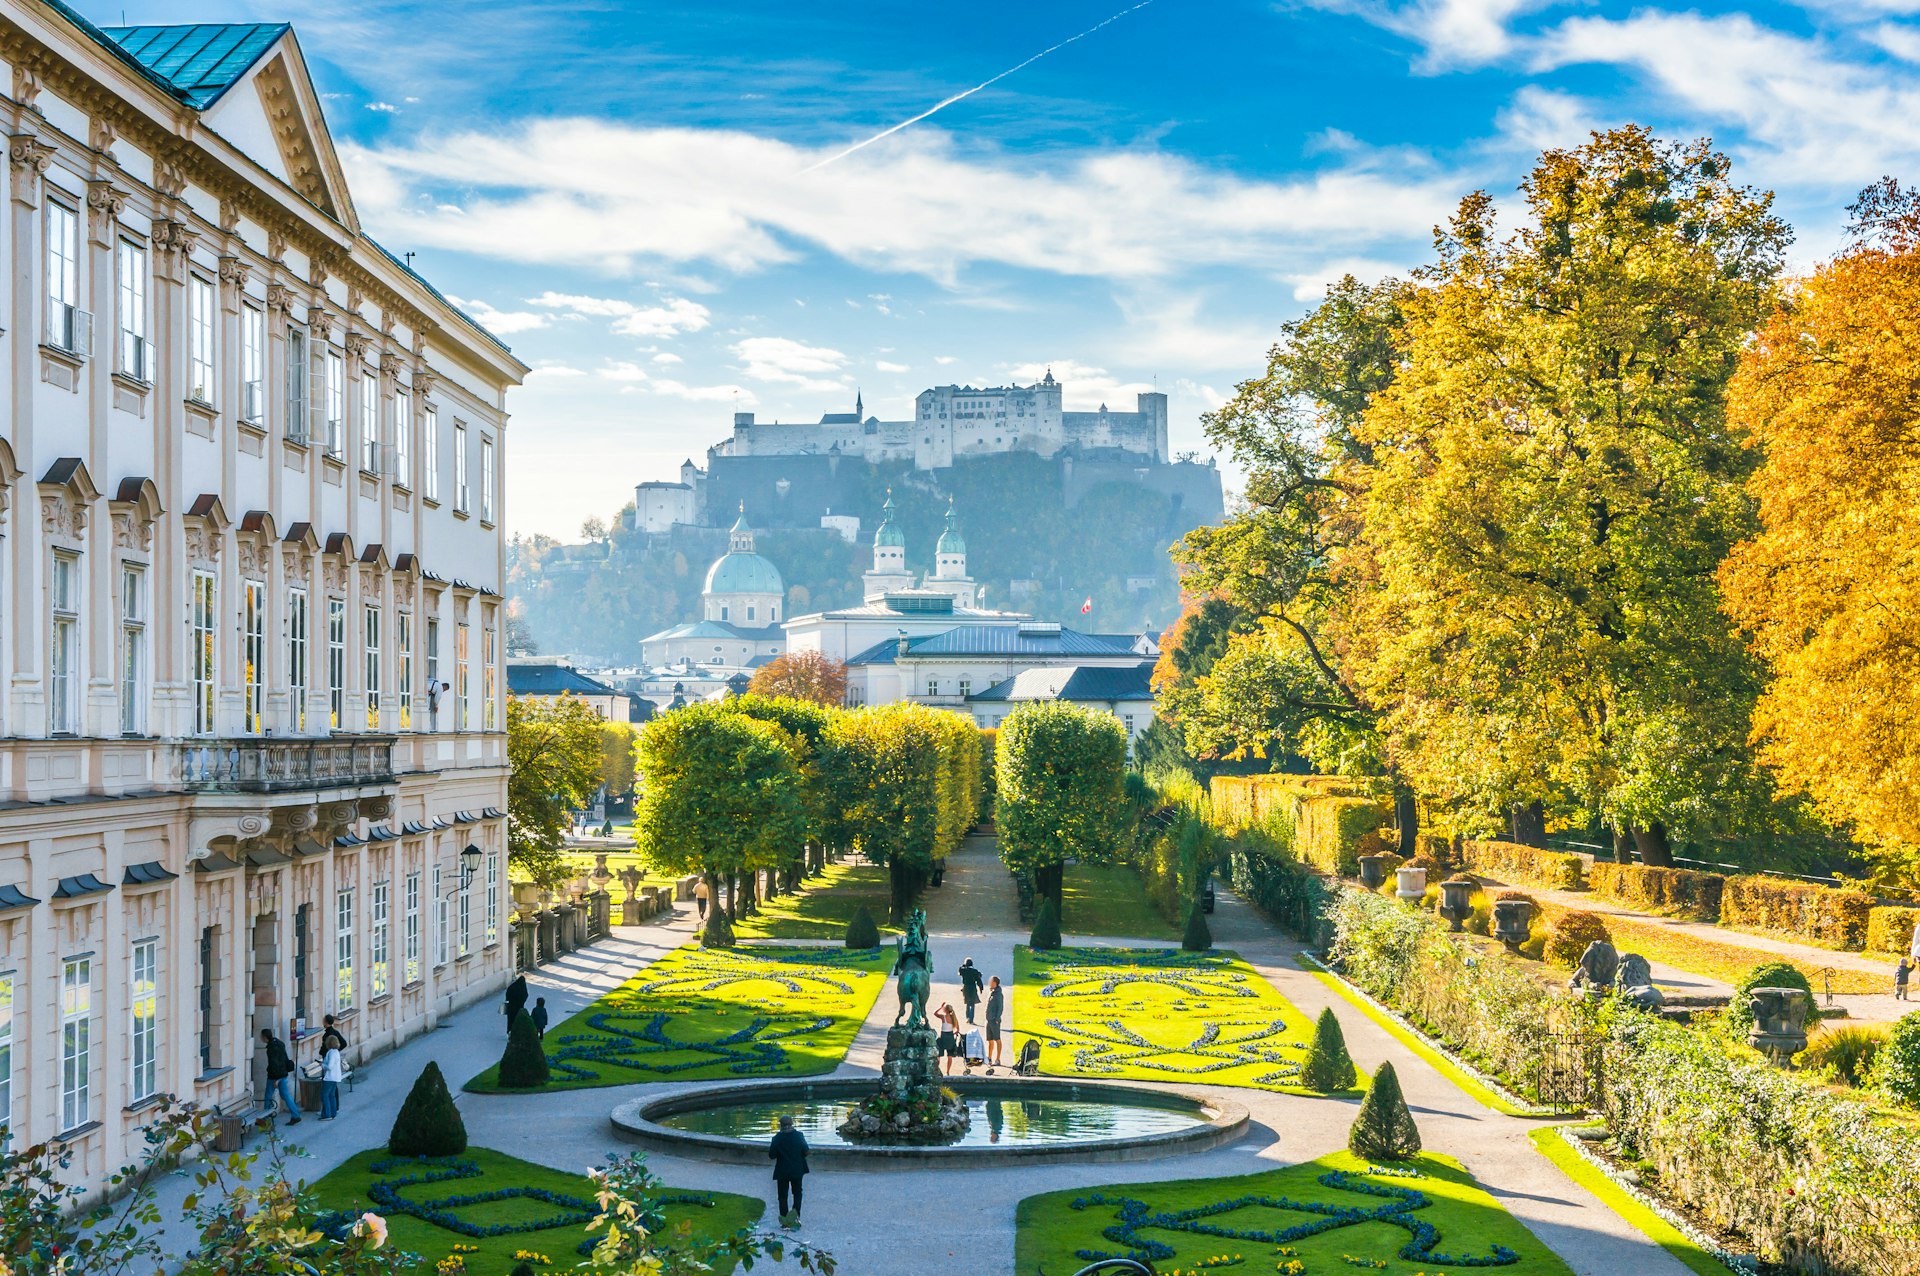 An elevated view over the carefully landscaped Mirabell Gardens in Salzburg, with the historic Hohensalzburg Fortress atop a hill in the background